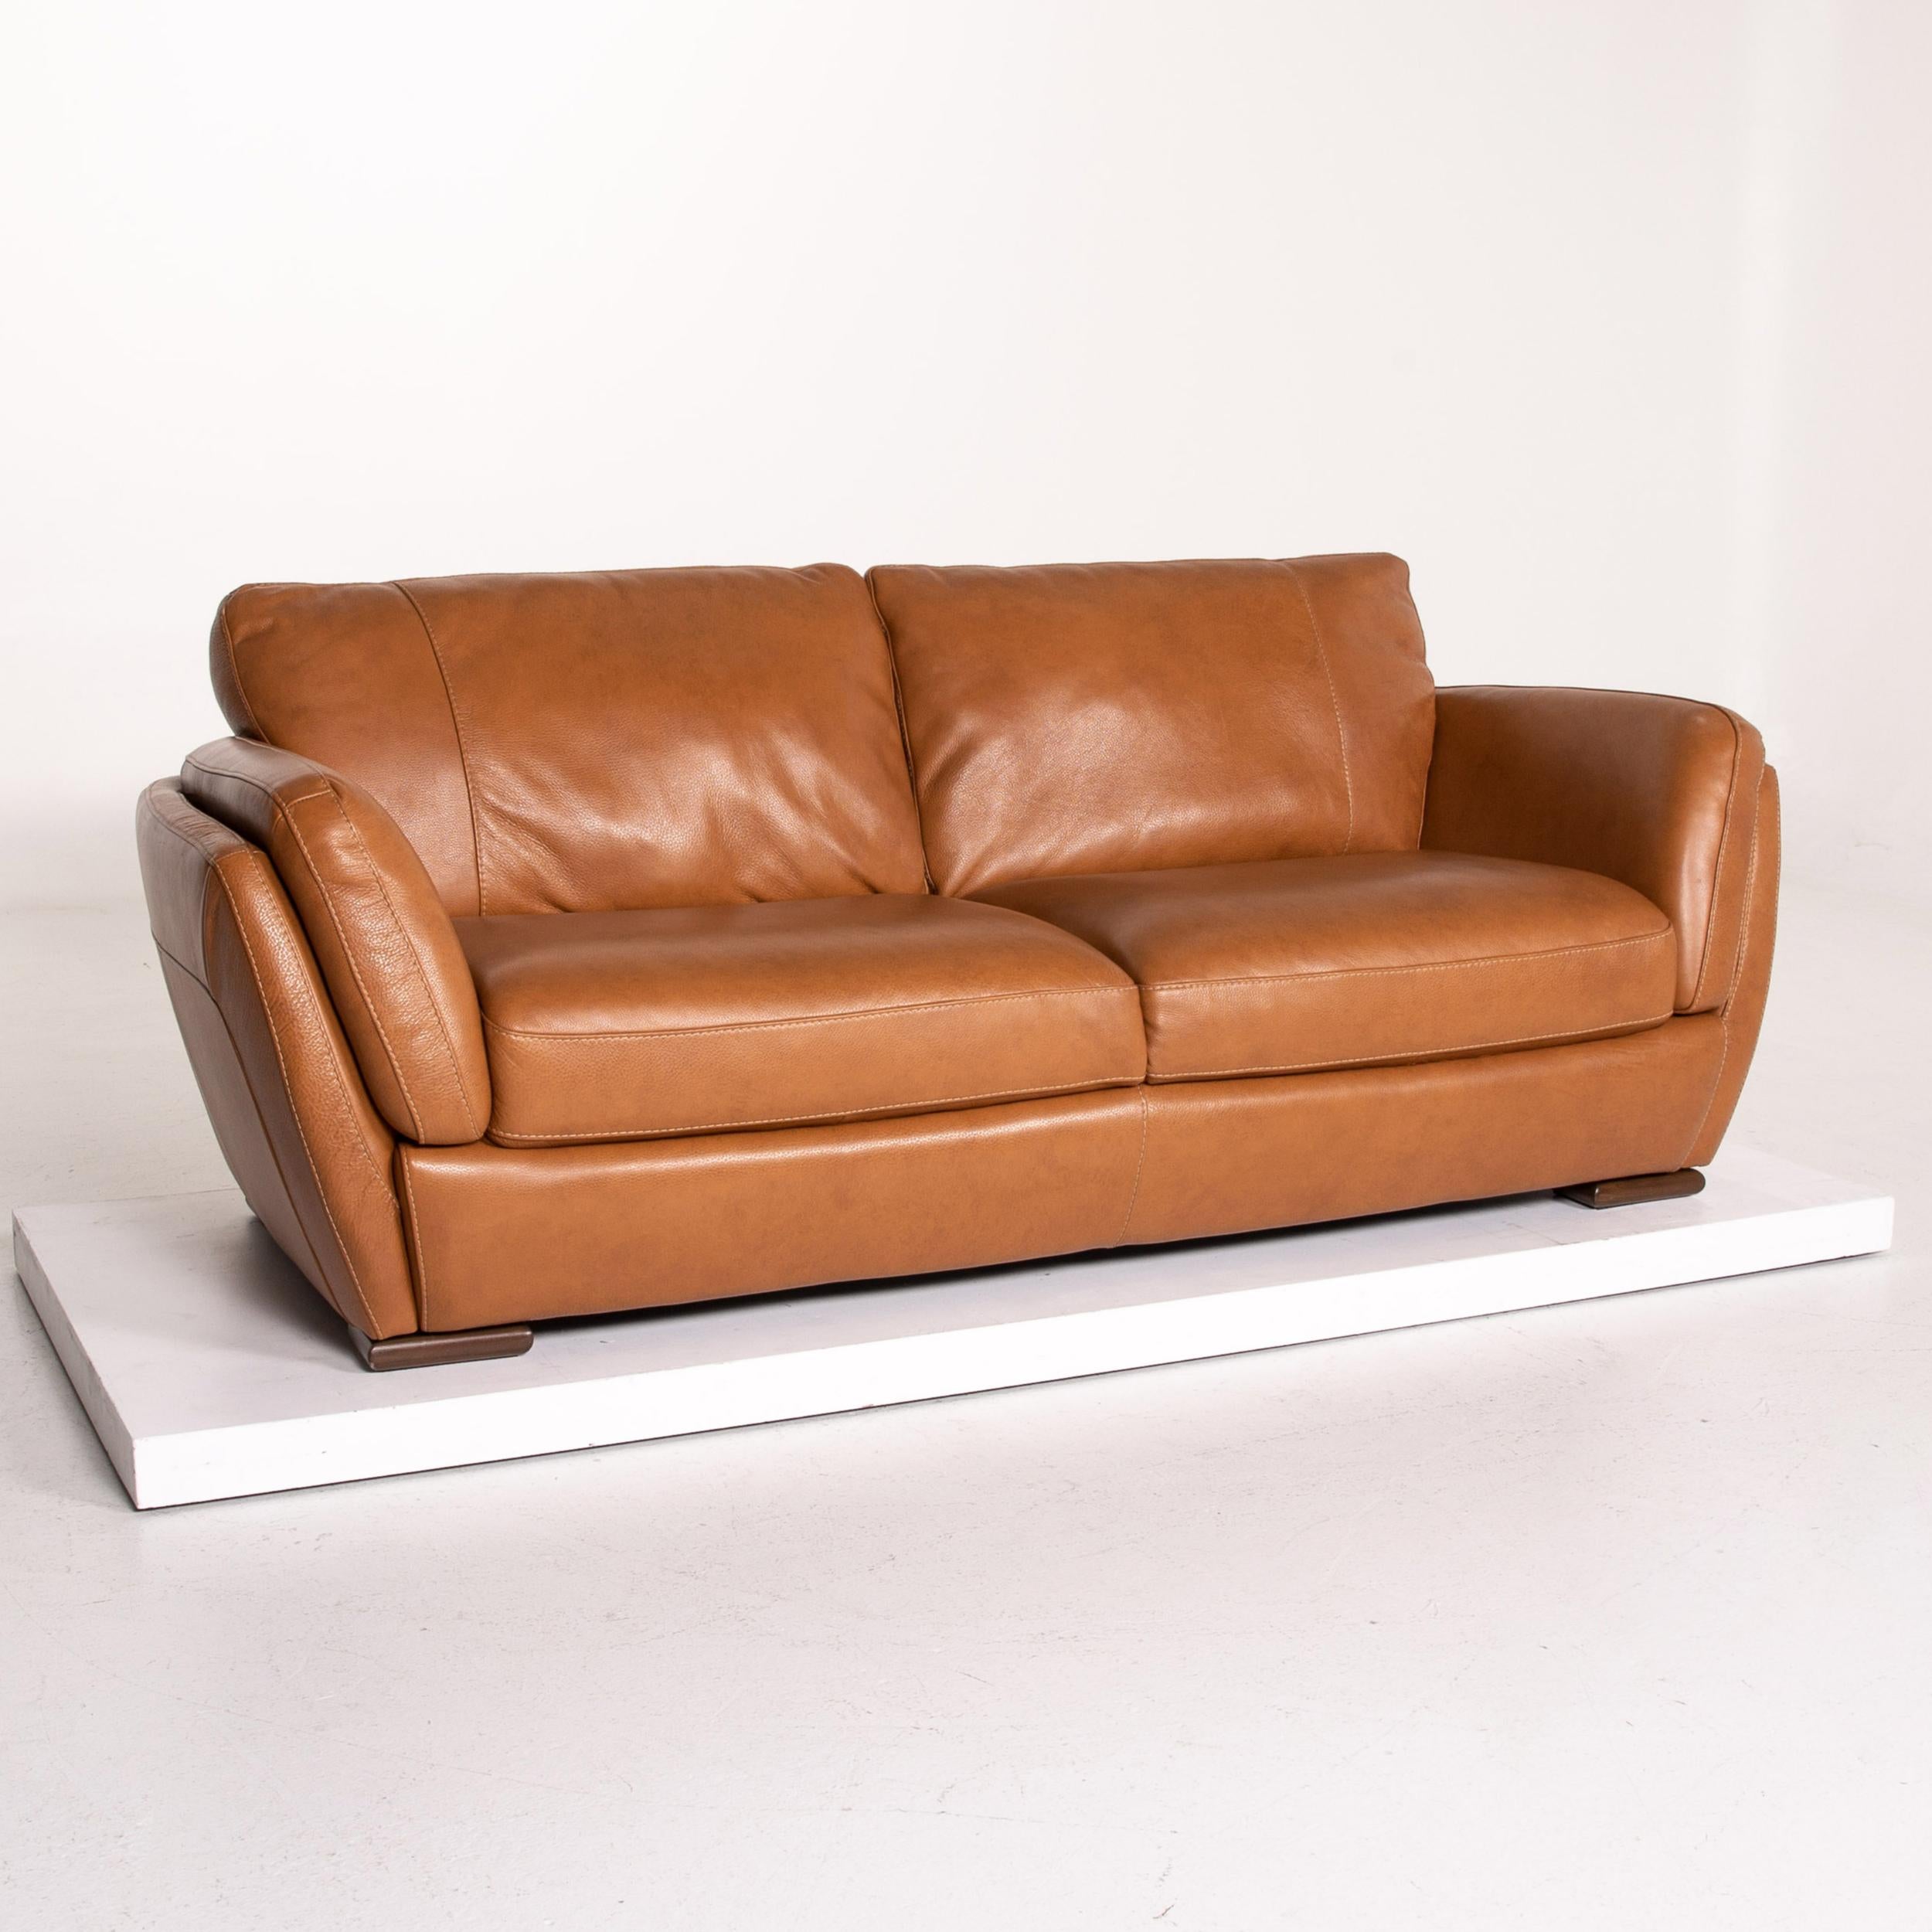 Modern Natuzzi Editions Leather Sofa Cognac Brown Three-Seater Couch